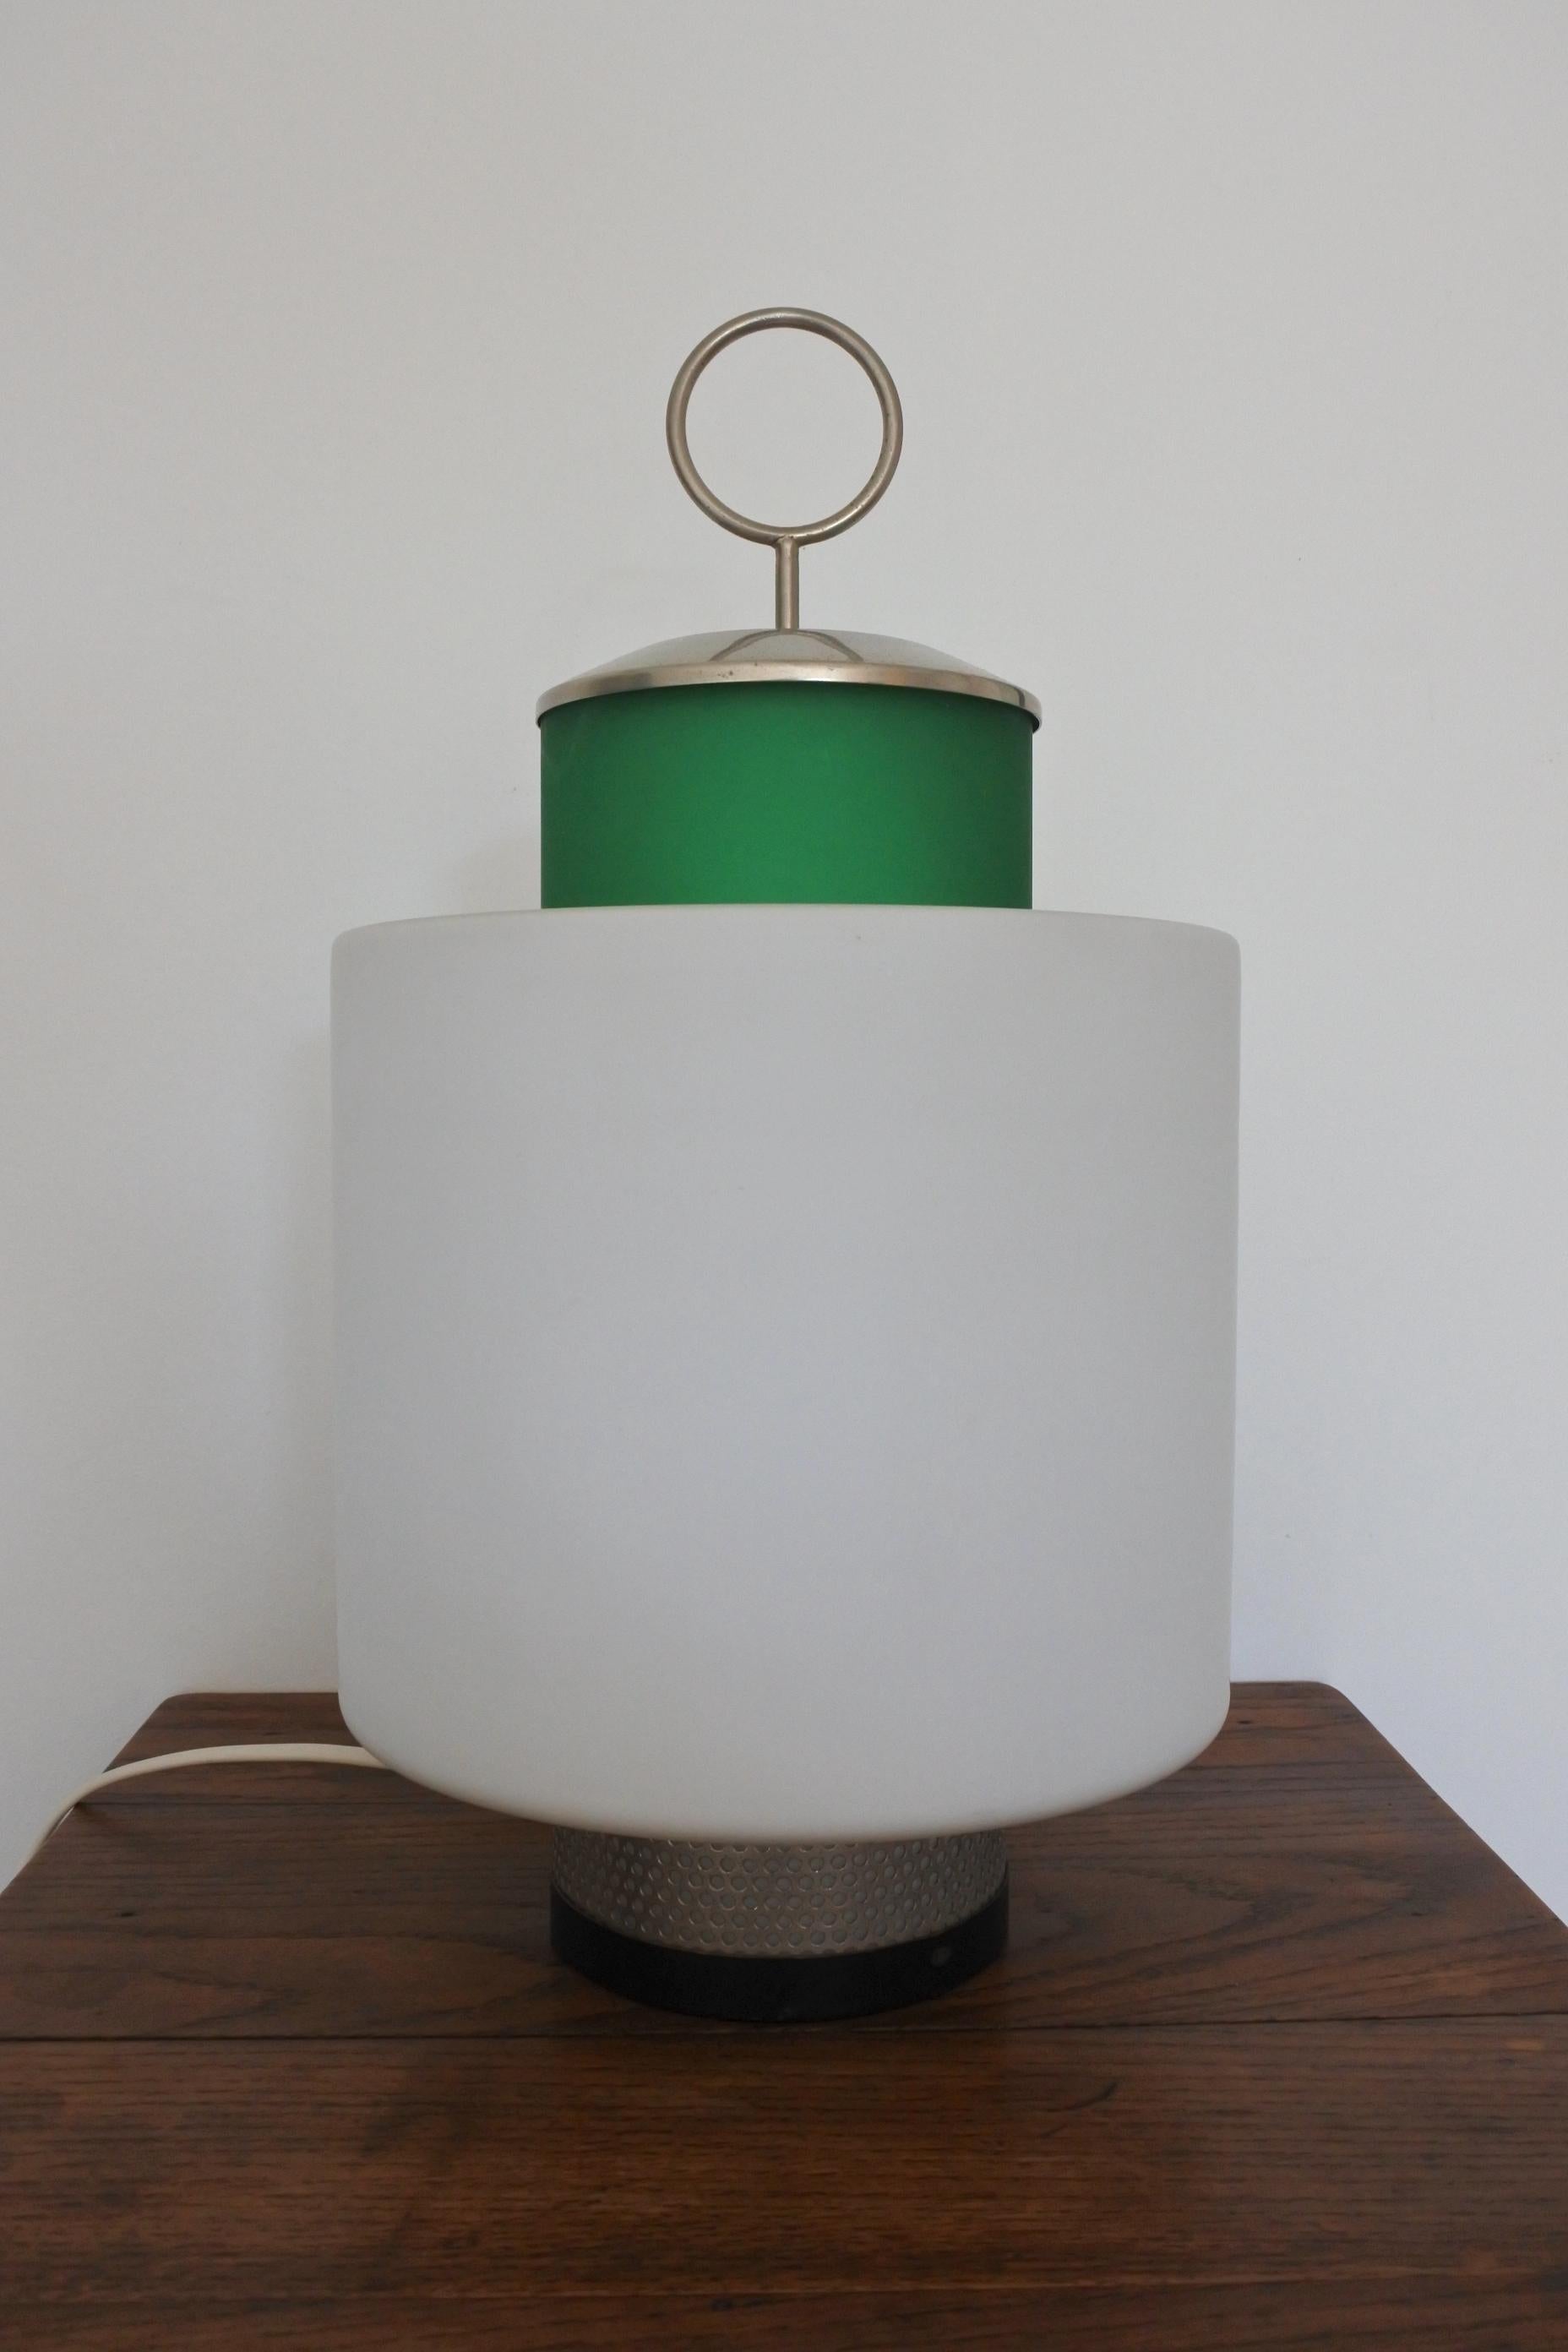 Italian Mid-Century Modern table lamp by Stilnovo.
Model 8052. 
Designed and made in Italy in 1958.
Made from green tinted glass, opaline glass, plated brass and lacquered brass.
Original label Stilnovo.

Literature: 